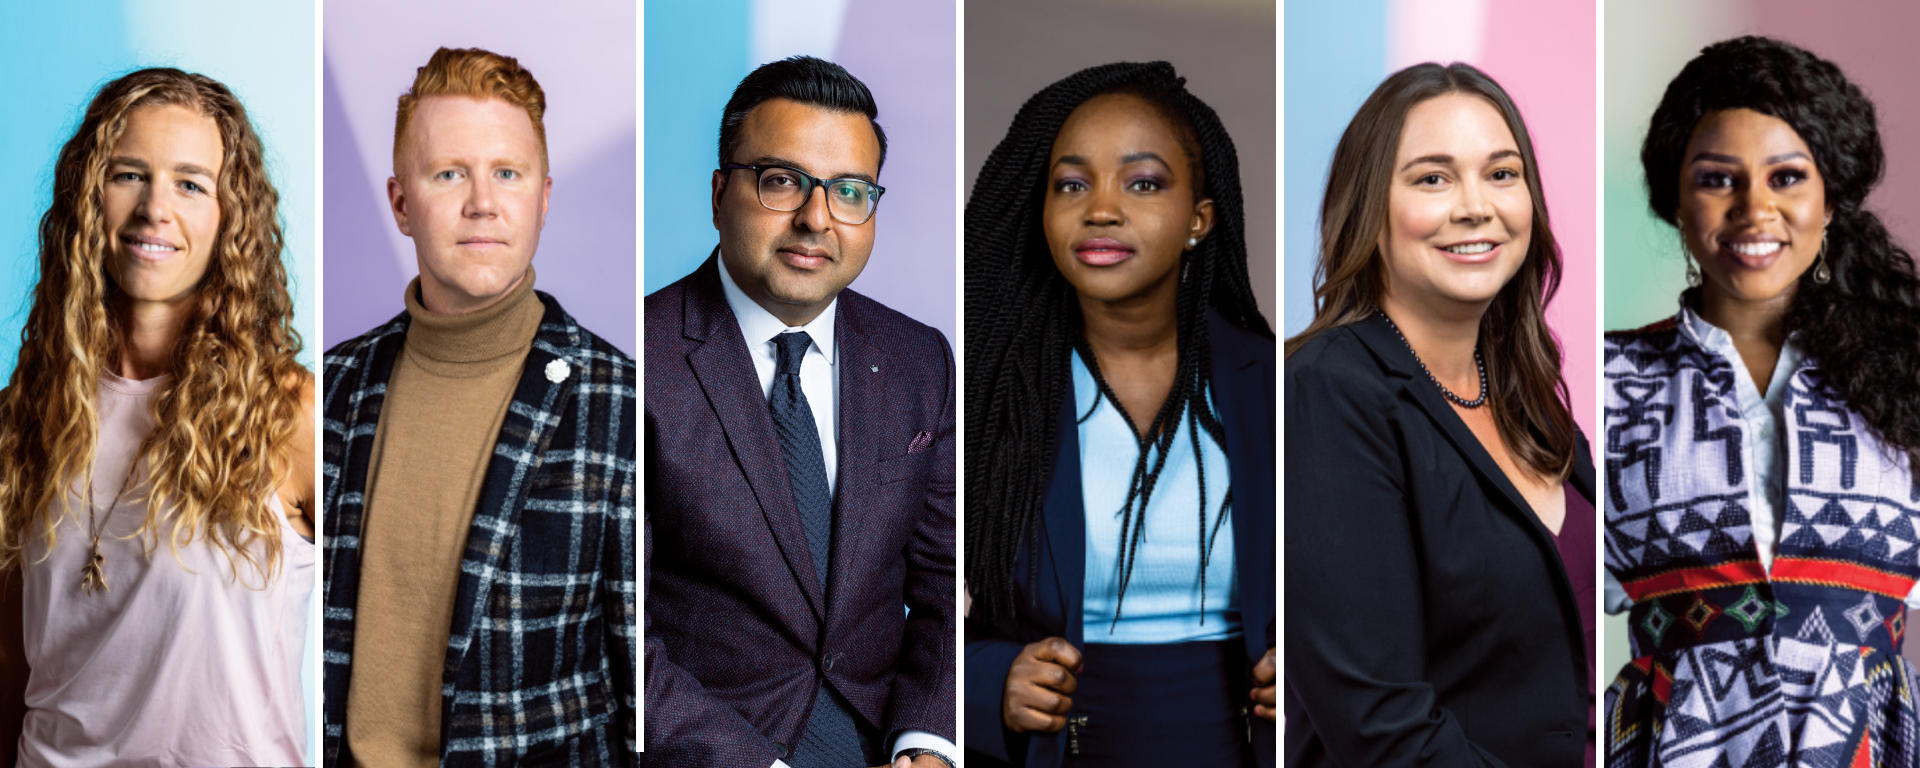 Top 40 Under 40 honorees